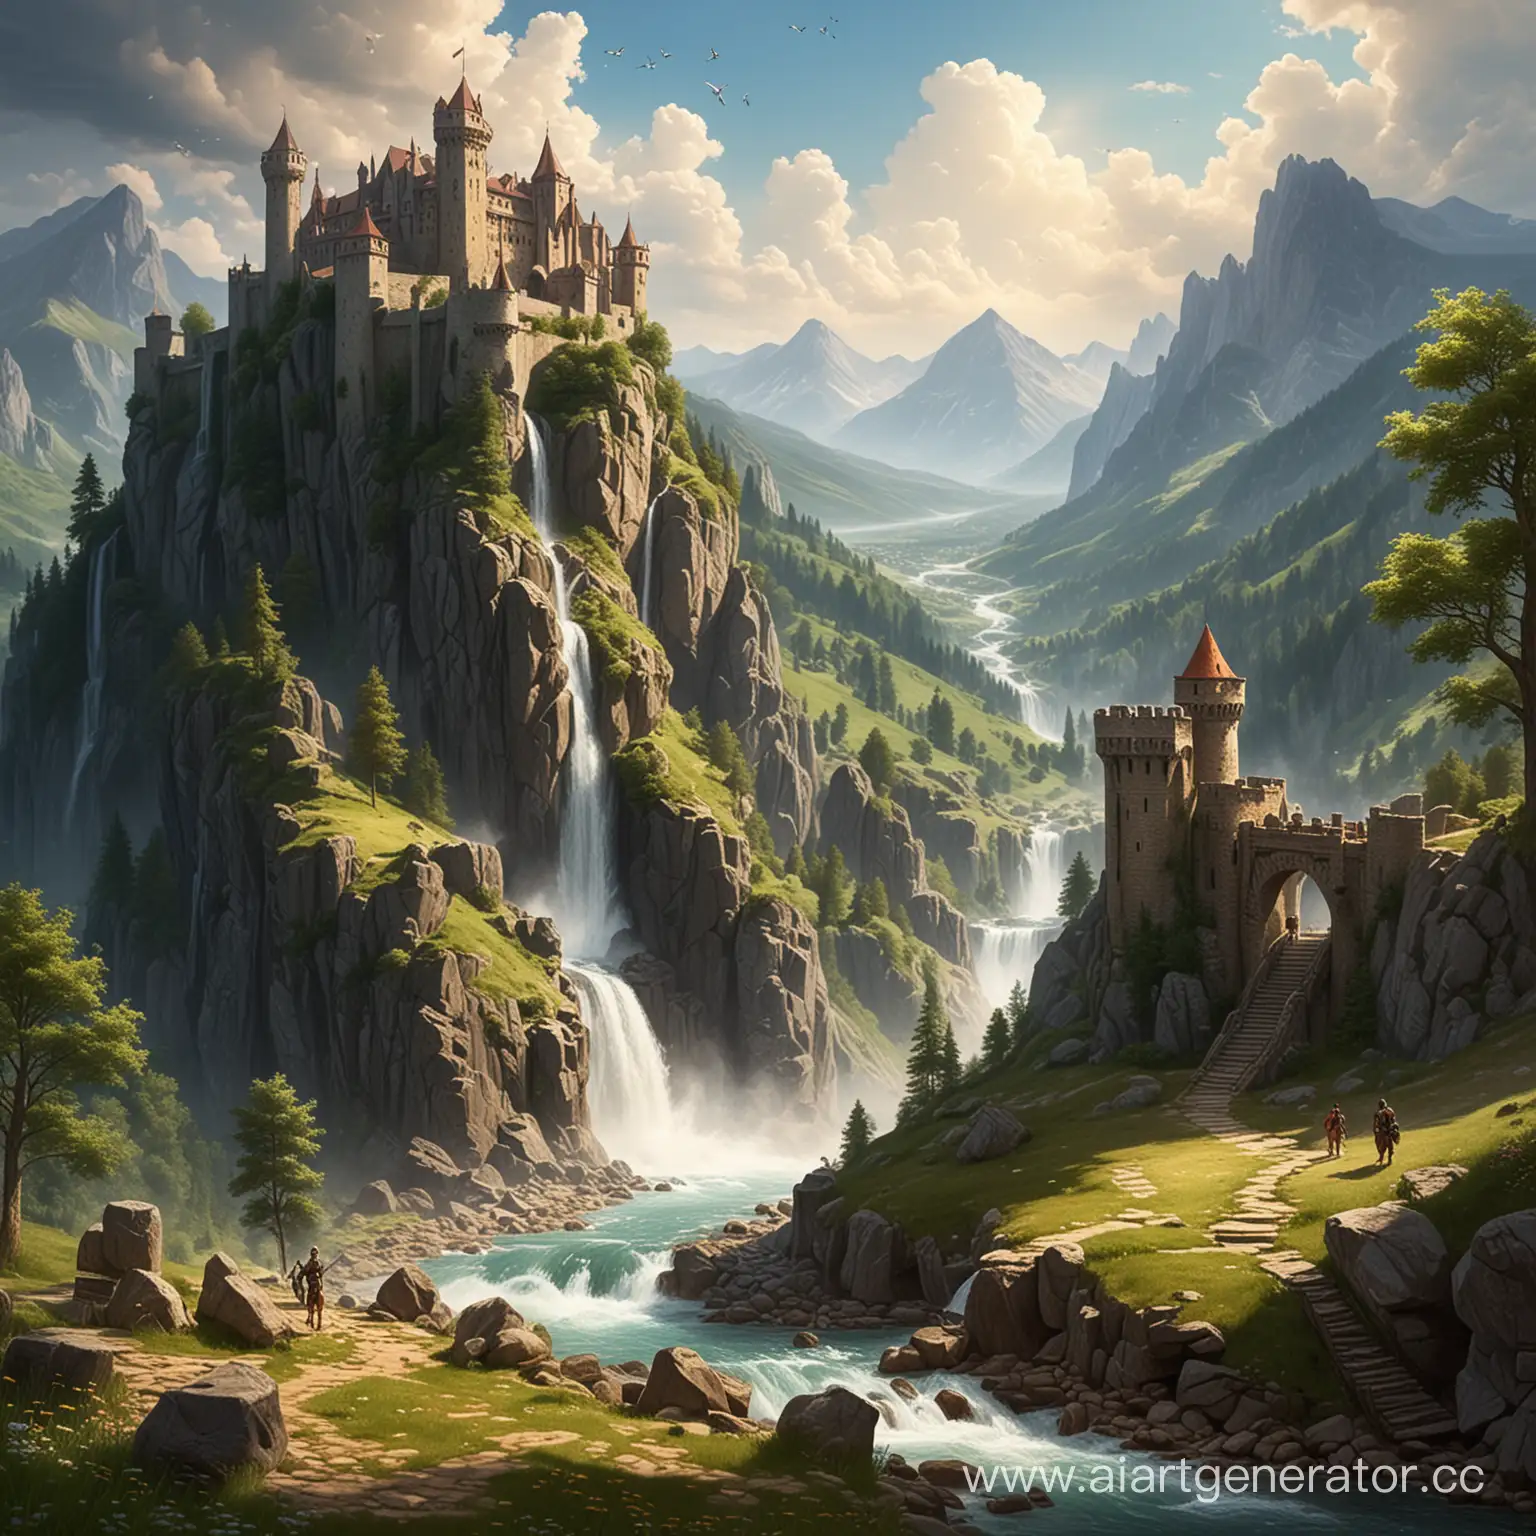 Knight-Leaping-Between-Castles-Overlooking-Mountainous-Waterfall